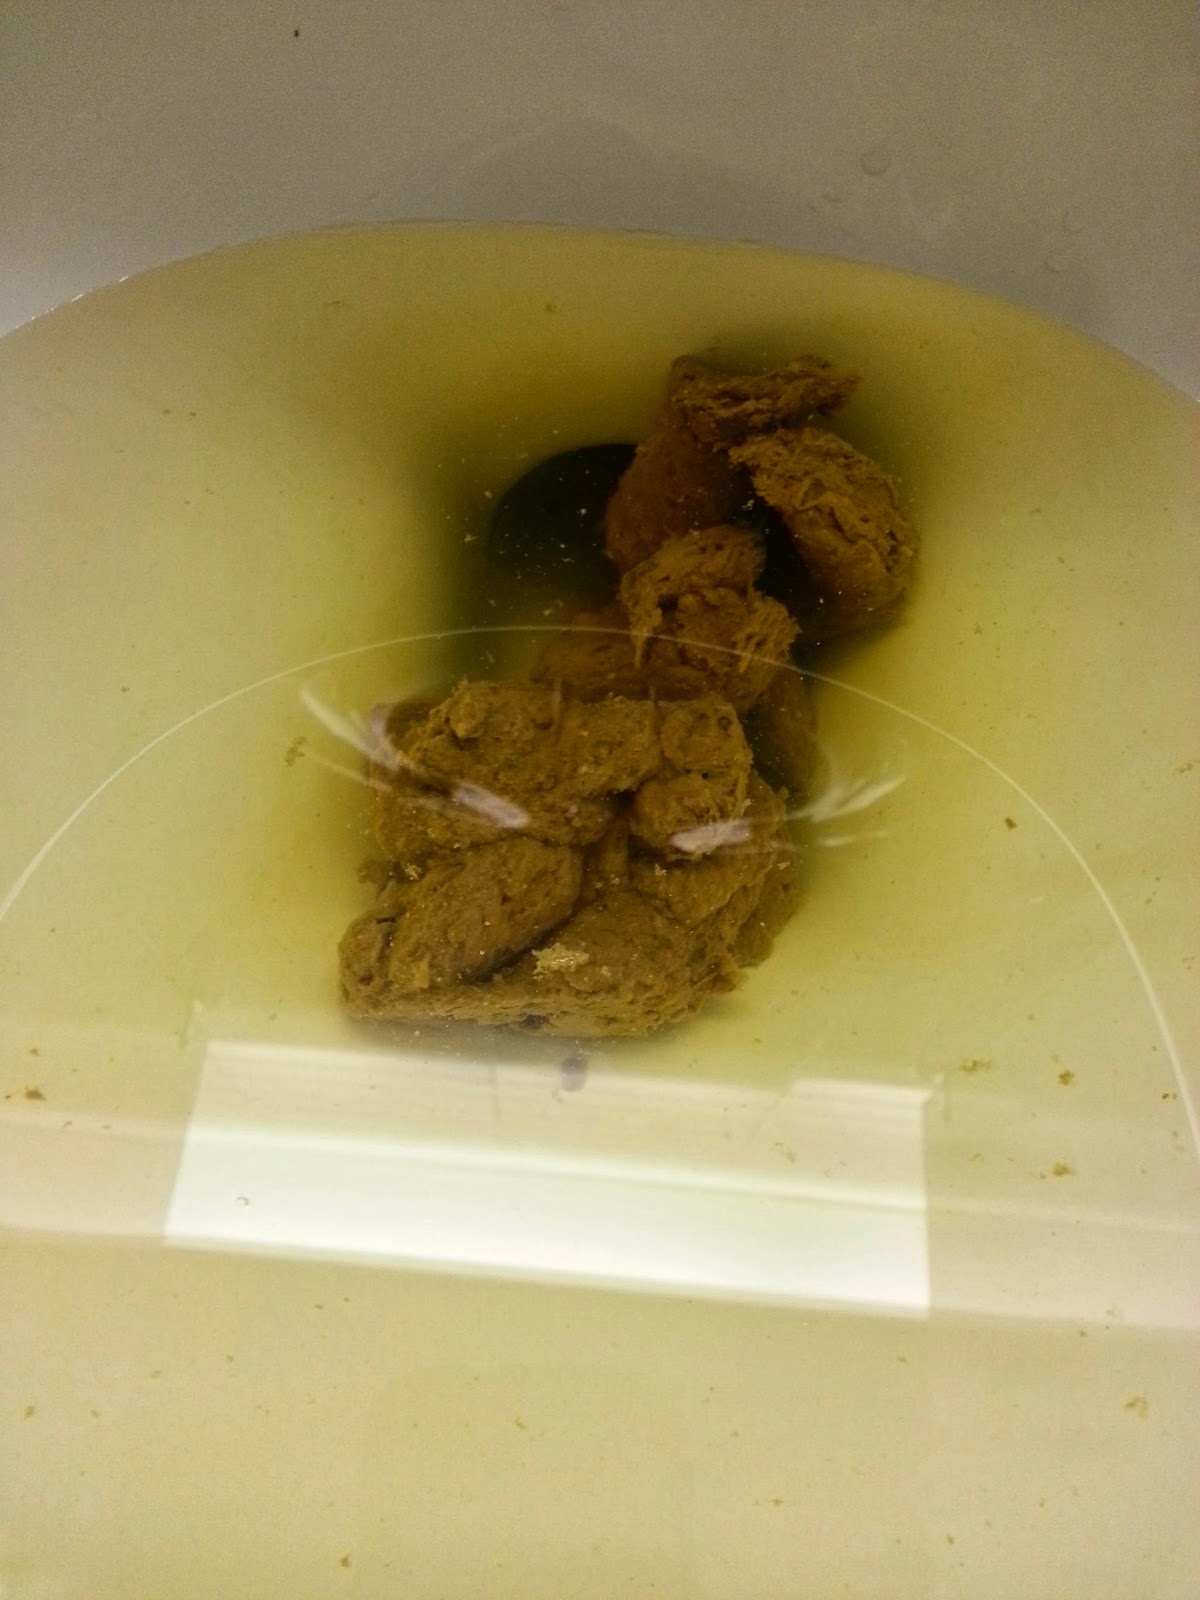 My Daily Poo: March 2014